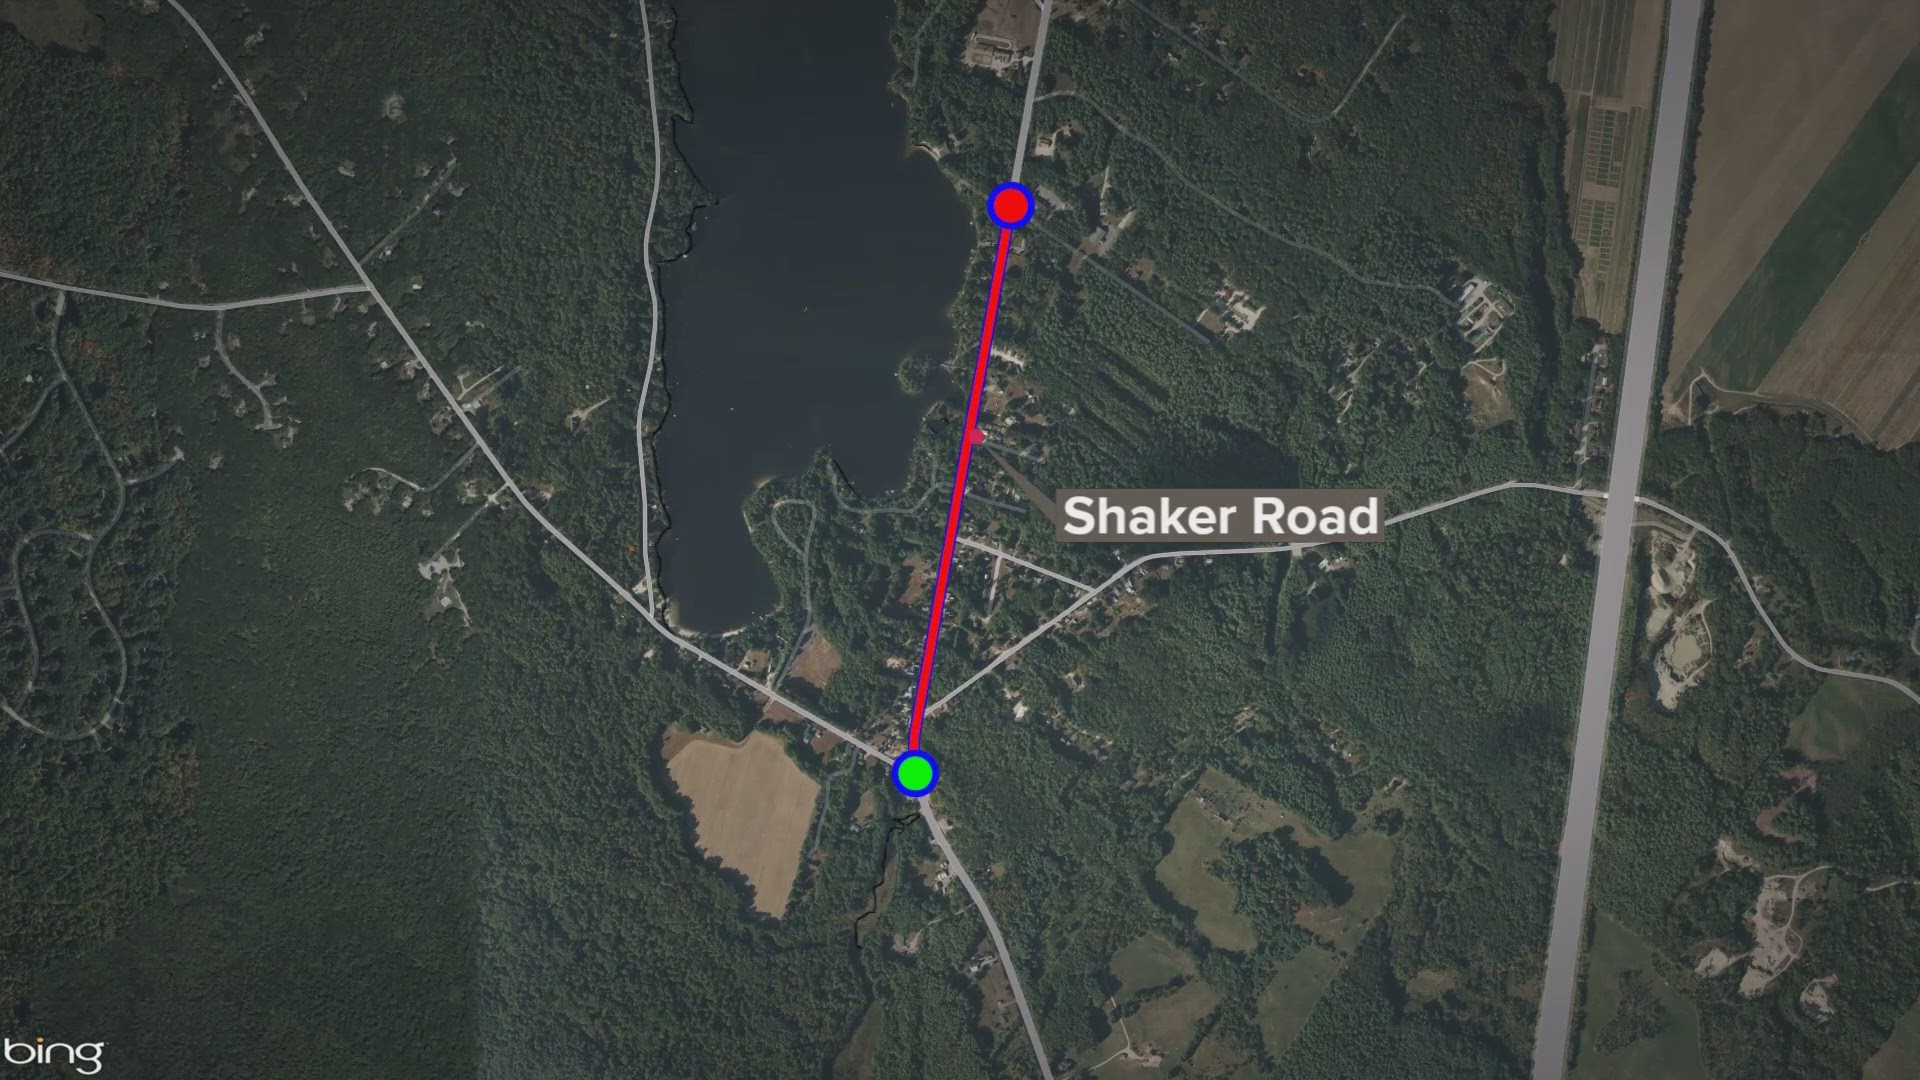 Officials are urging drivers to avoid Shaker Road near the Maine State Police barracks after a crash Friday night.